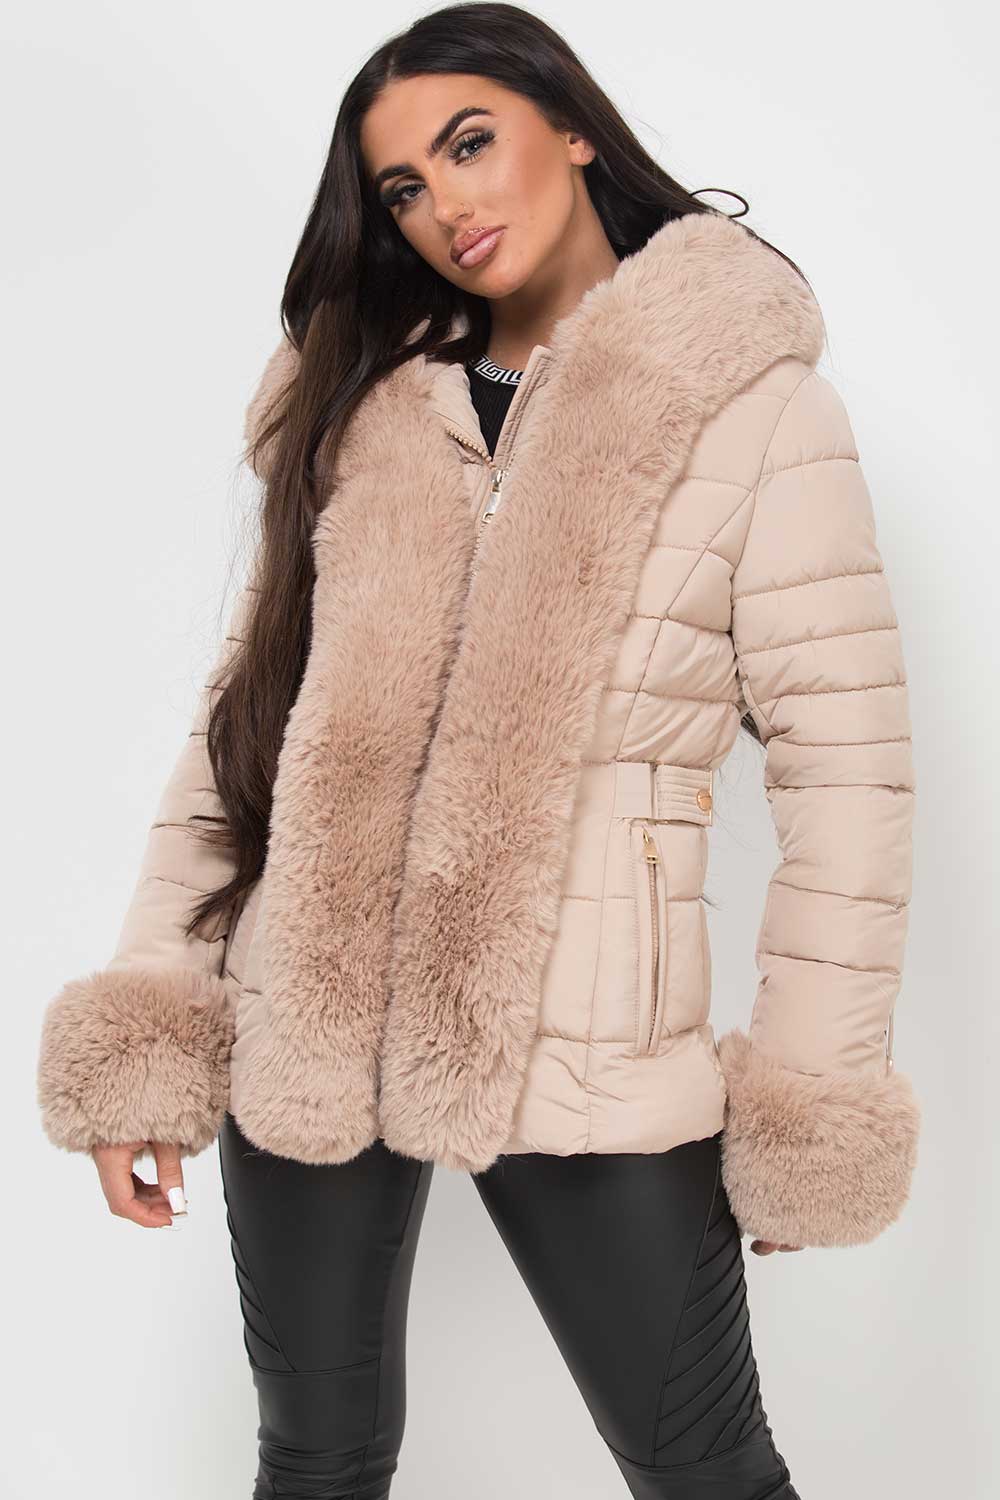 puffer jacket with faux fur hood cuffs and trim beige